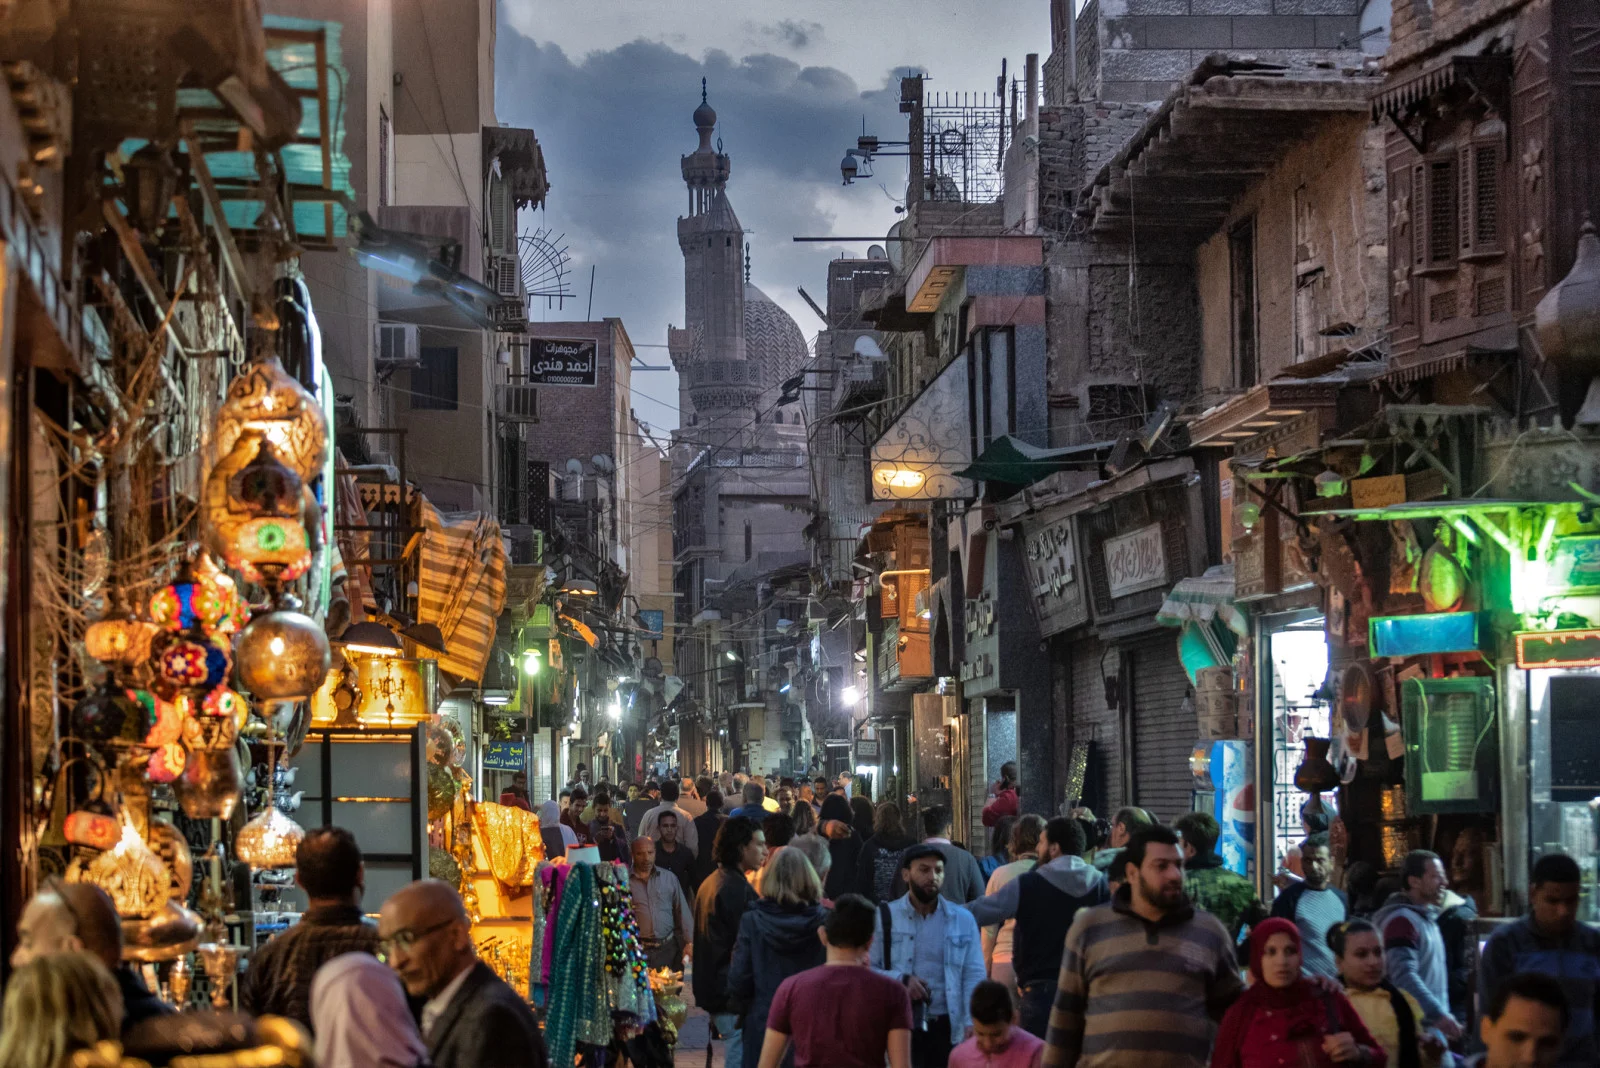 Crowds in a very popular street in Cairo, Egypt during the late afternoon. (Izzet Keribar/ Stone/ Getty Images)